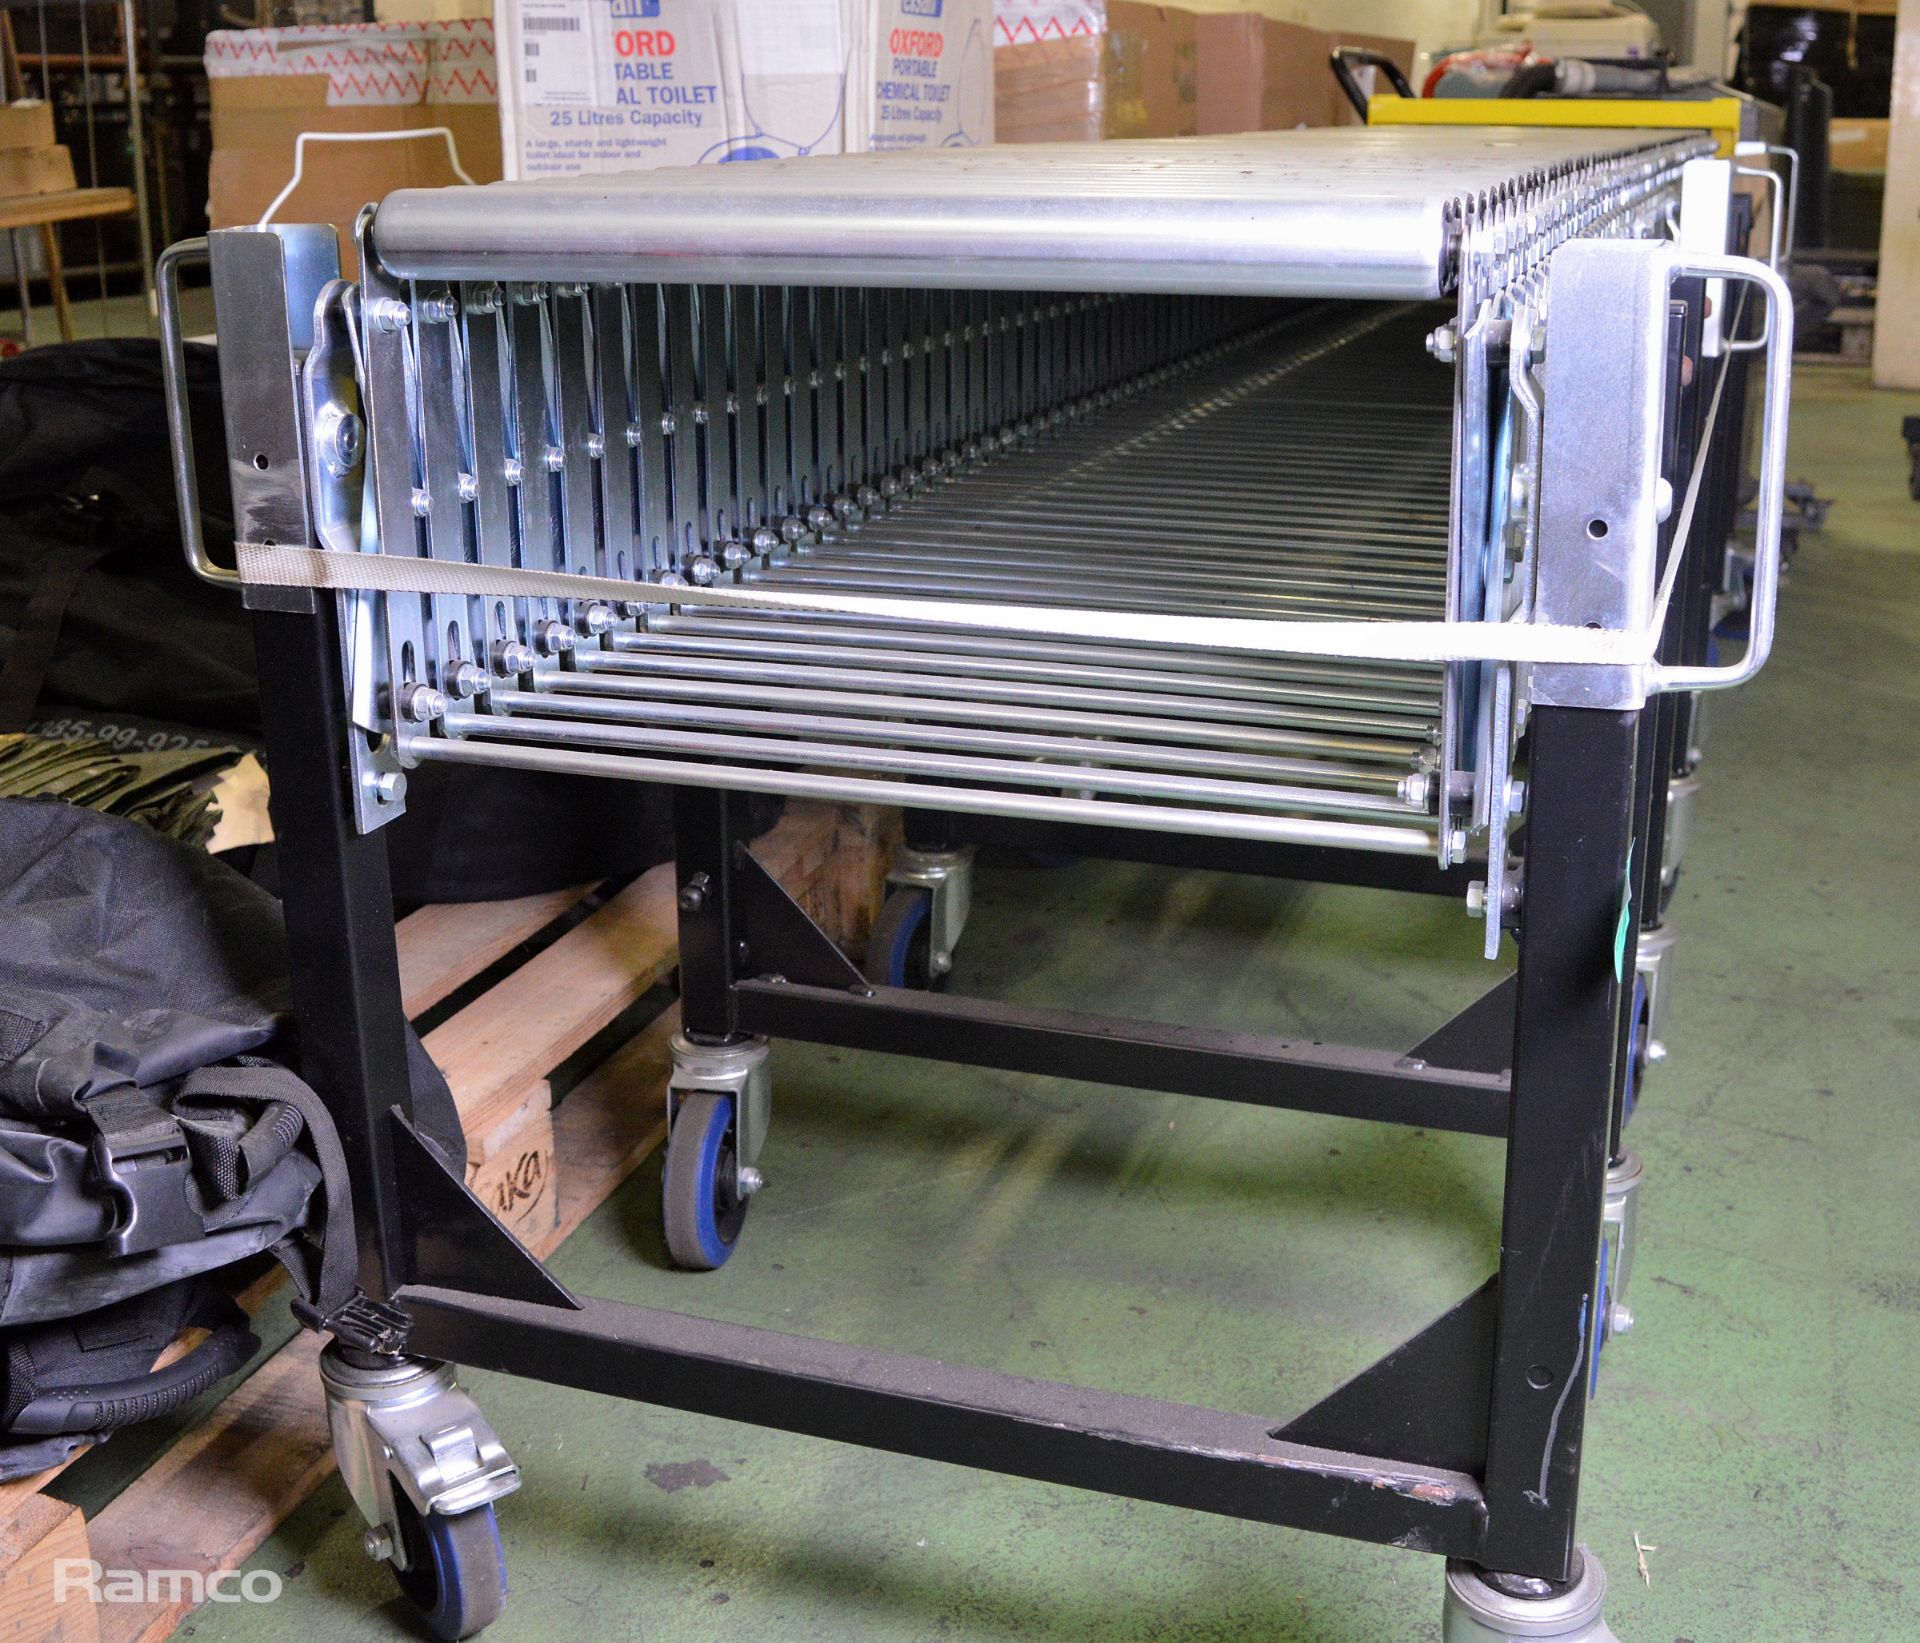 Flexible Steel Roller Conveyor System Max - L 6100mm (extended) x W 700mm x H 750mm - Image 3 of 3